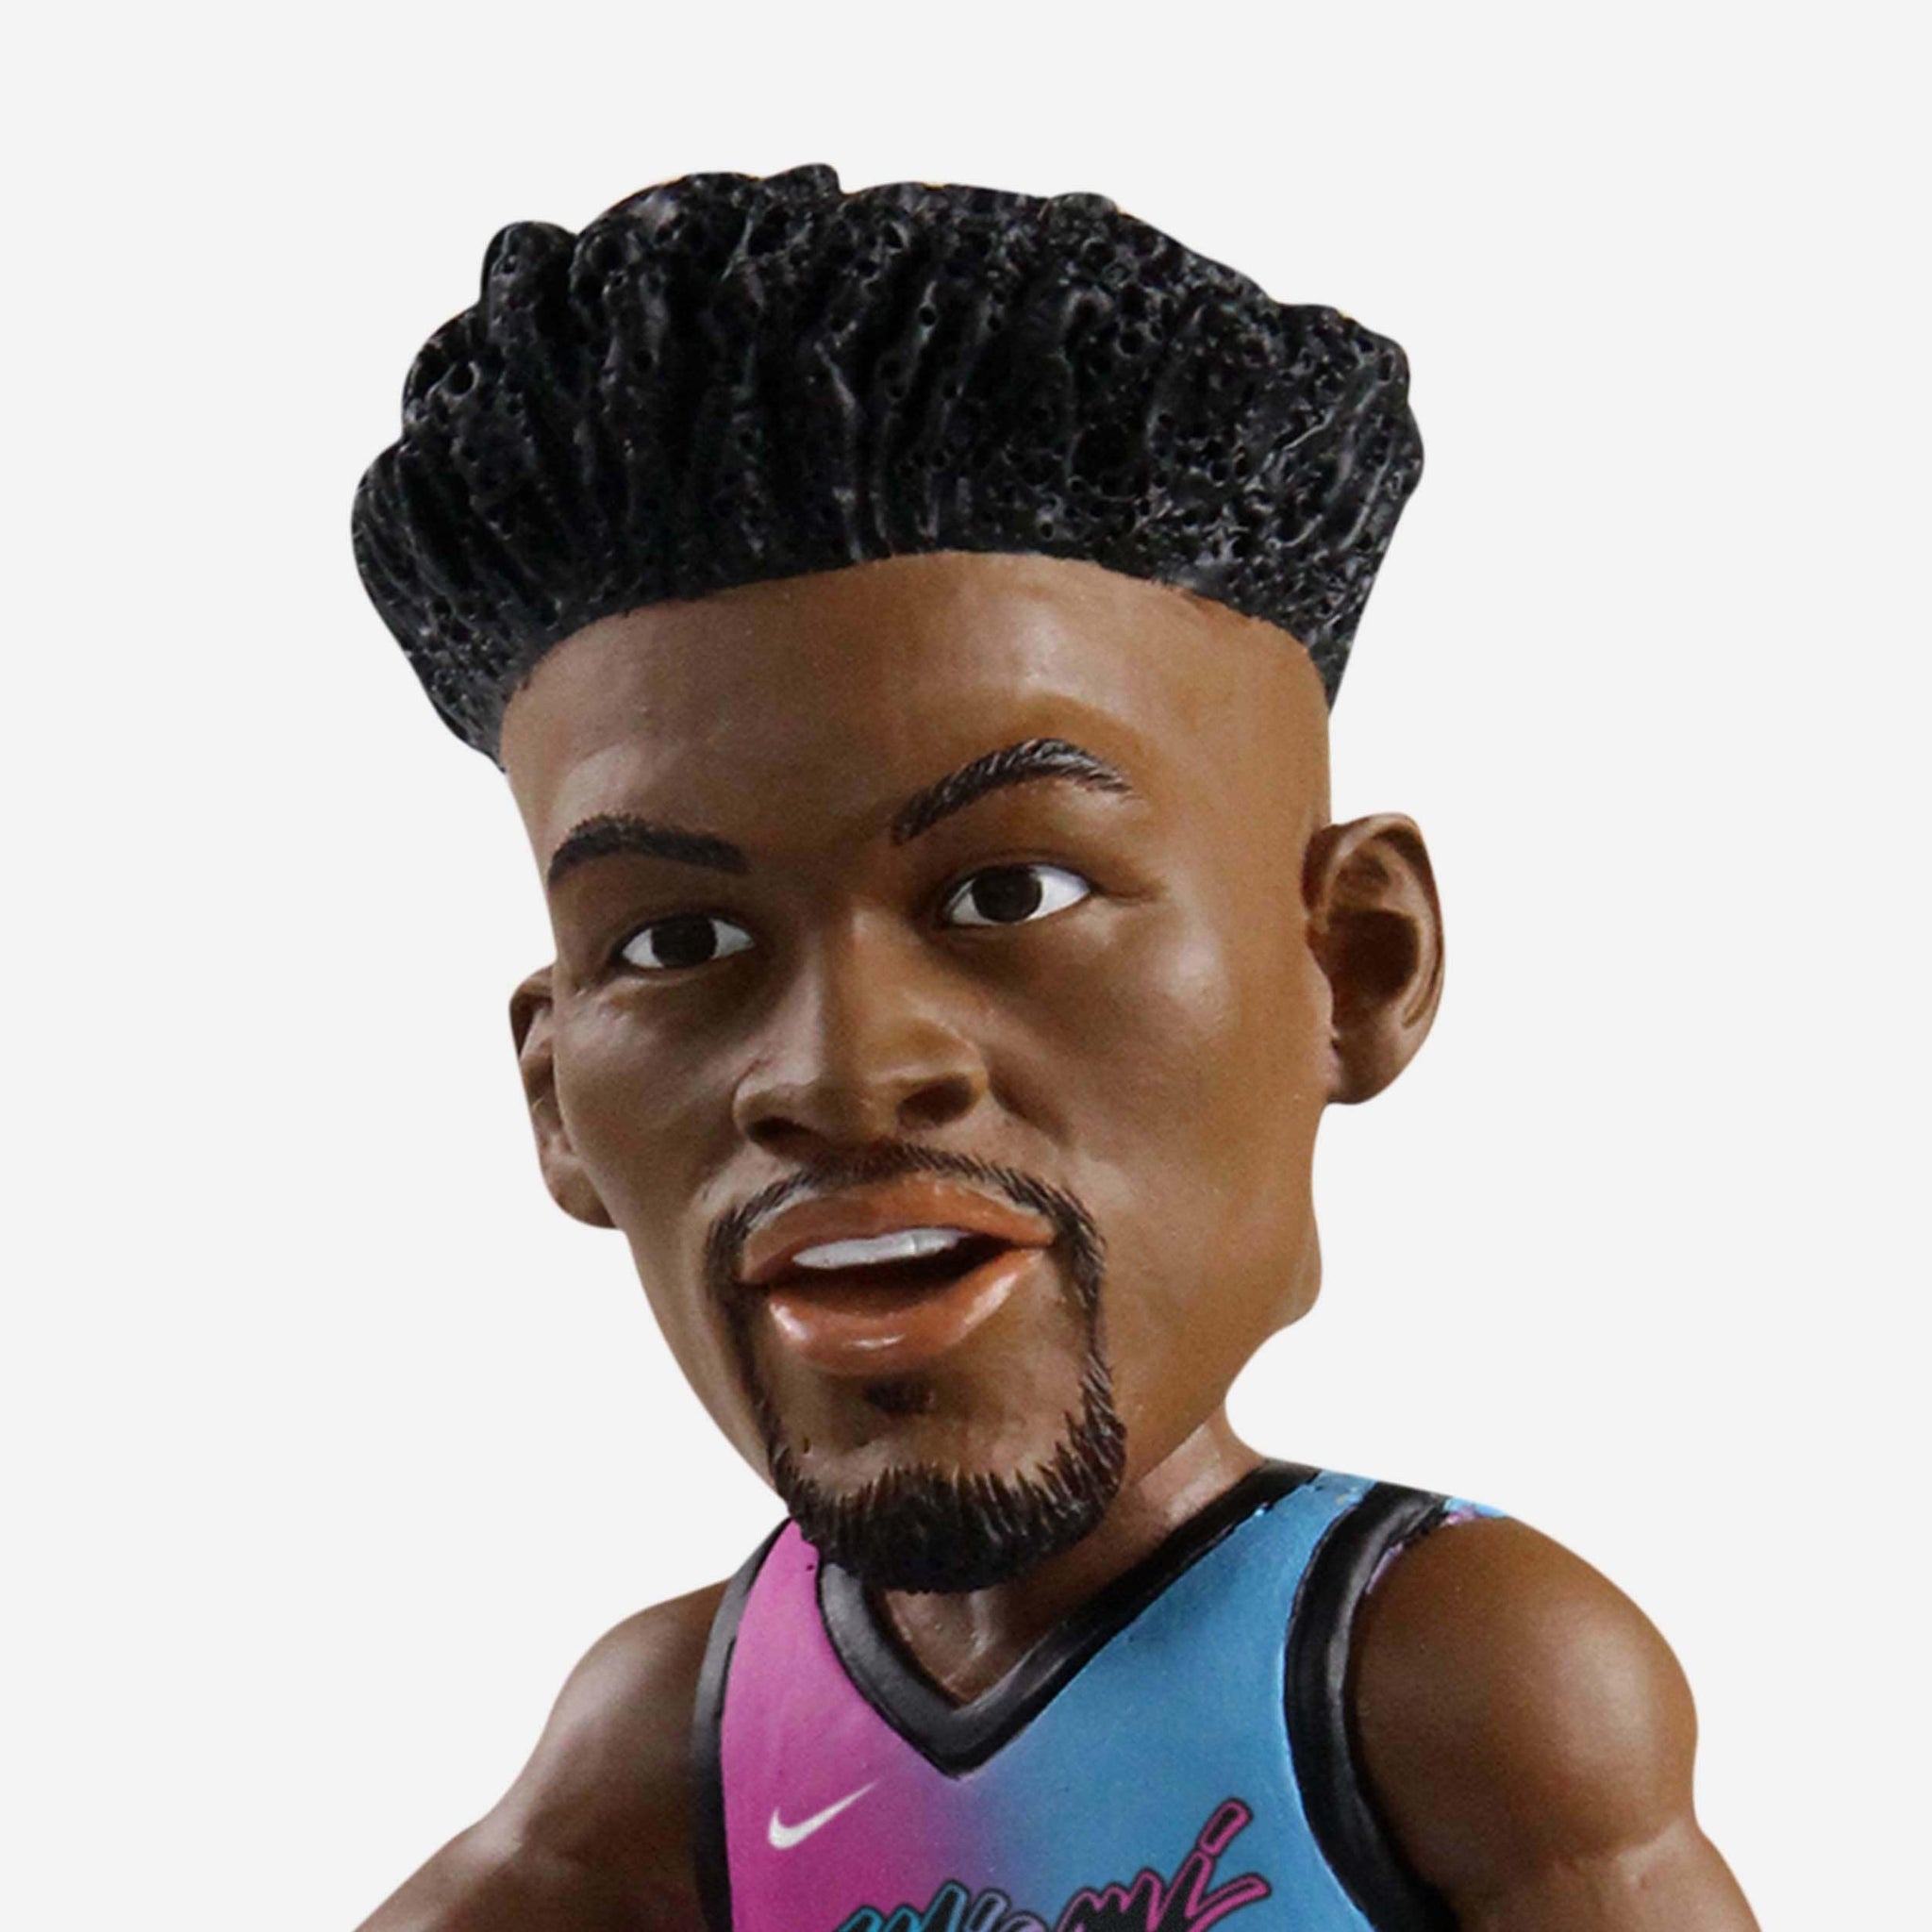 animated jimmy butler profile